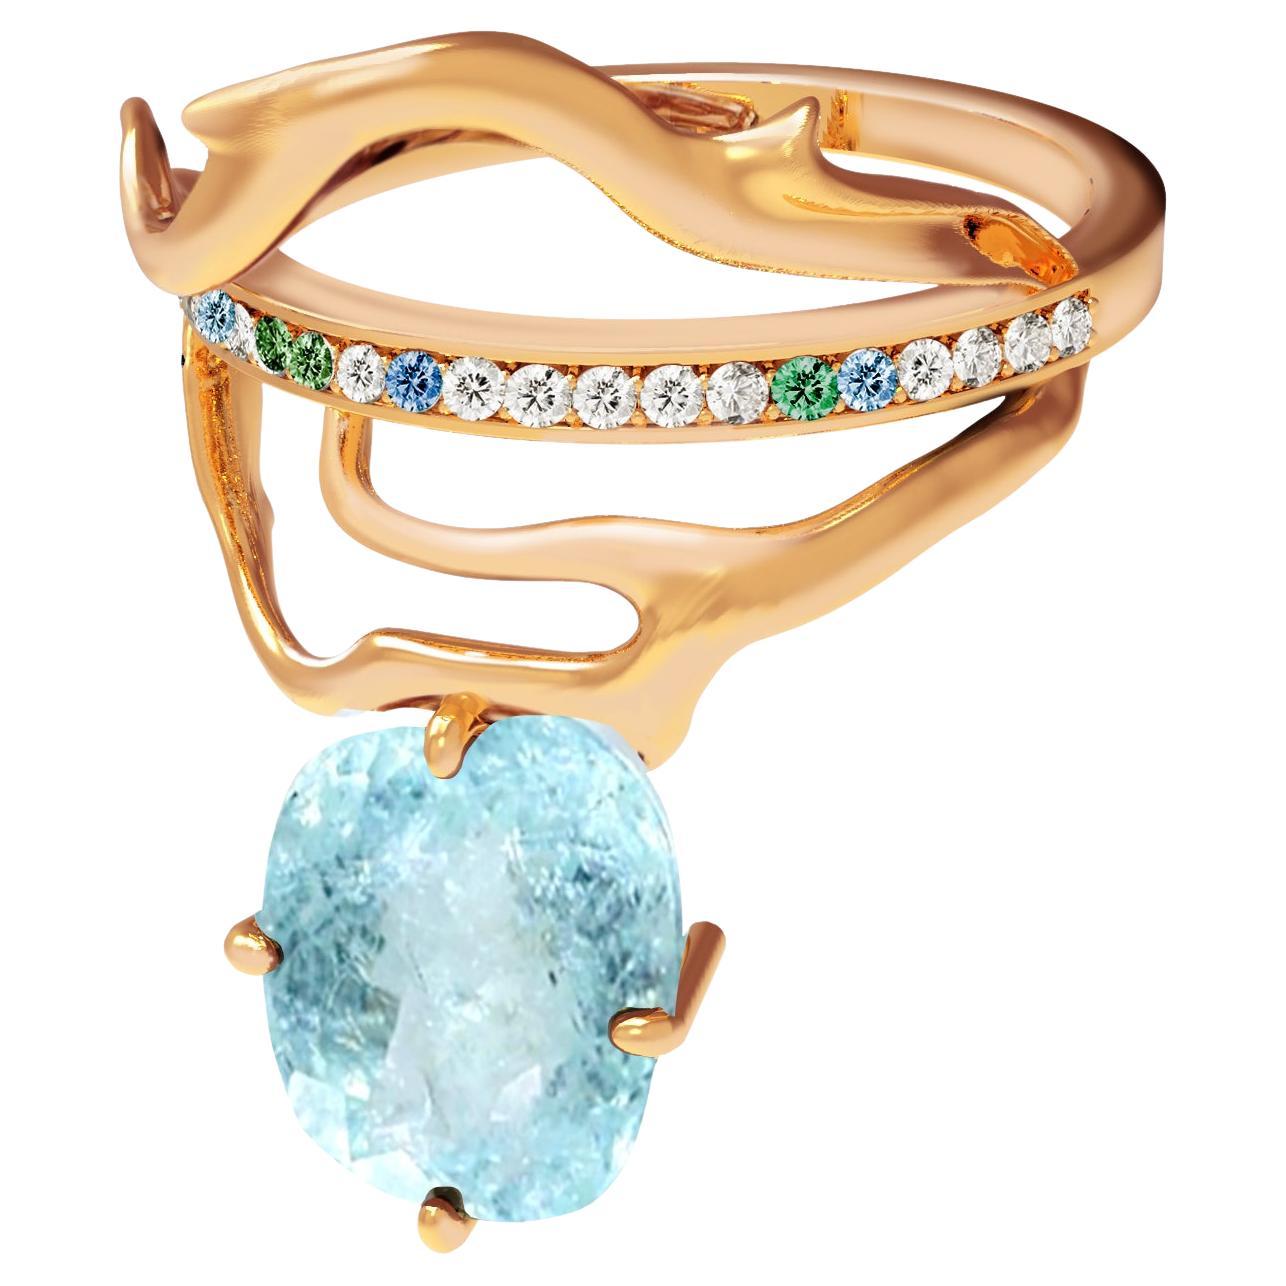 18 Karat White Gold Diamonds Ring with Paraiba Tourmaline and Sapphires For Sale 7